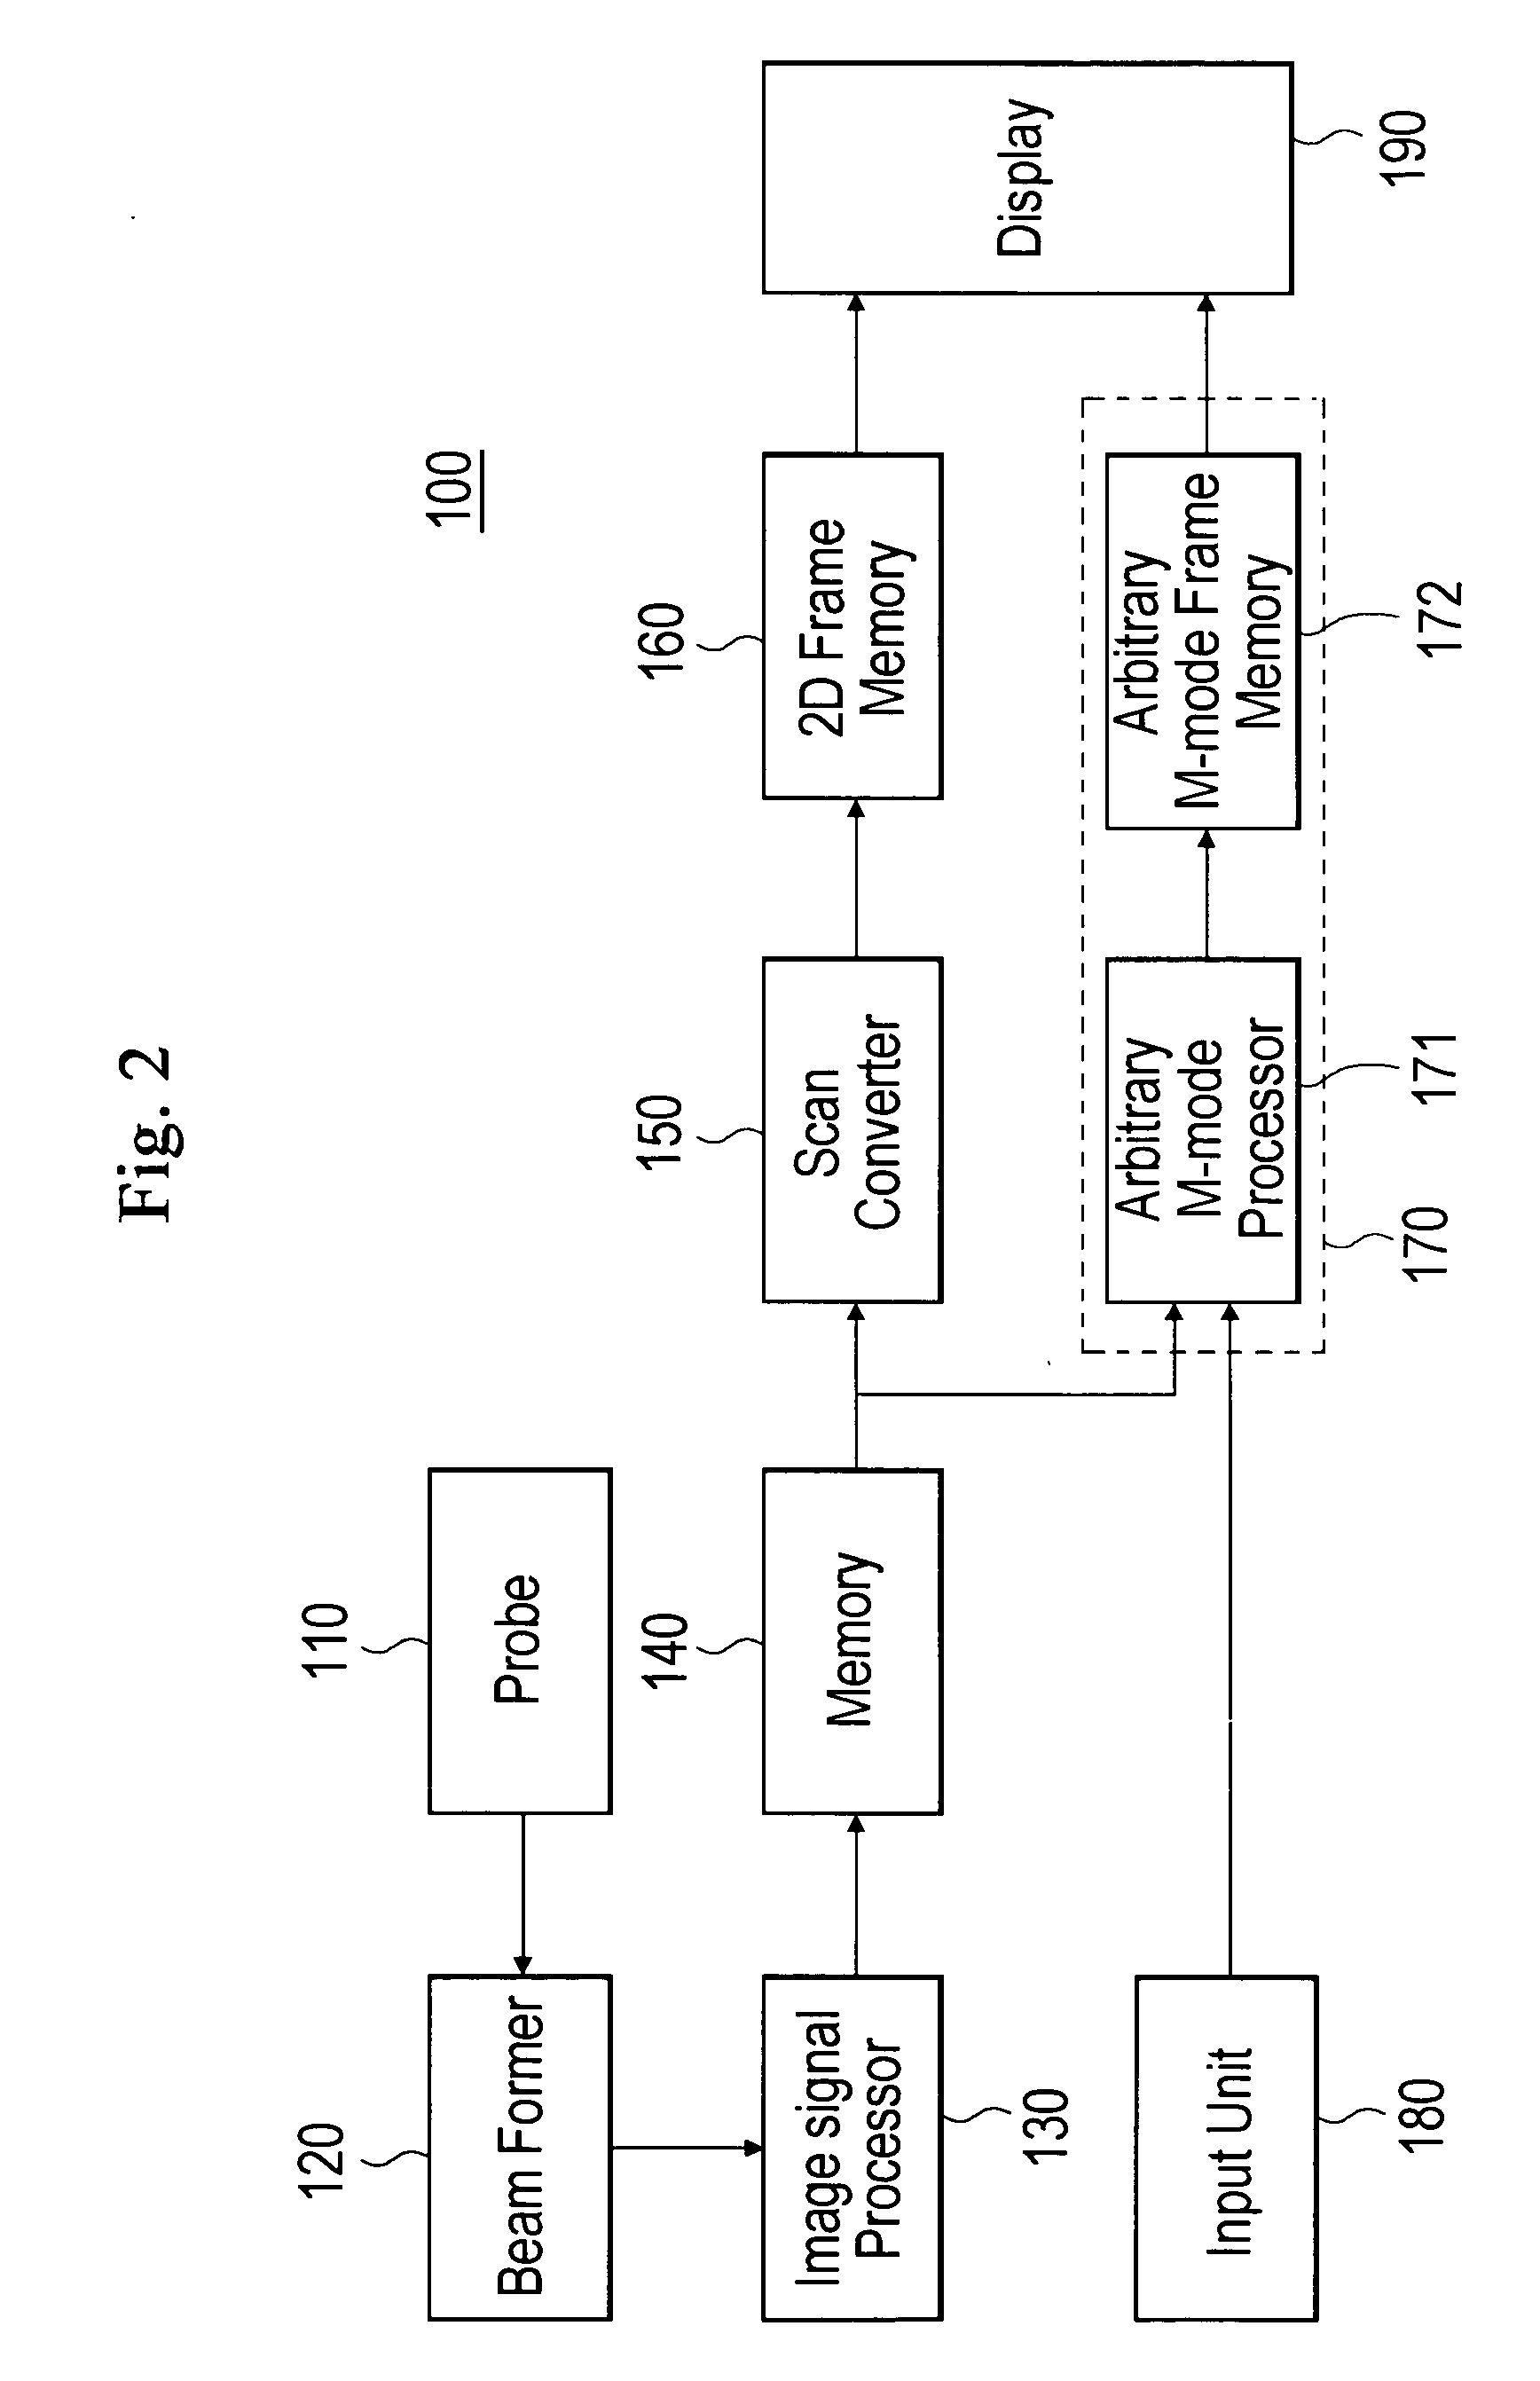 Ultrasound diagnostic system and method of forming arbitrary M-mode images